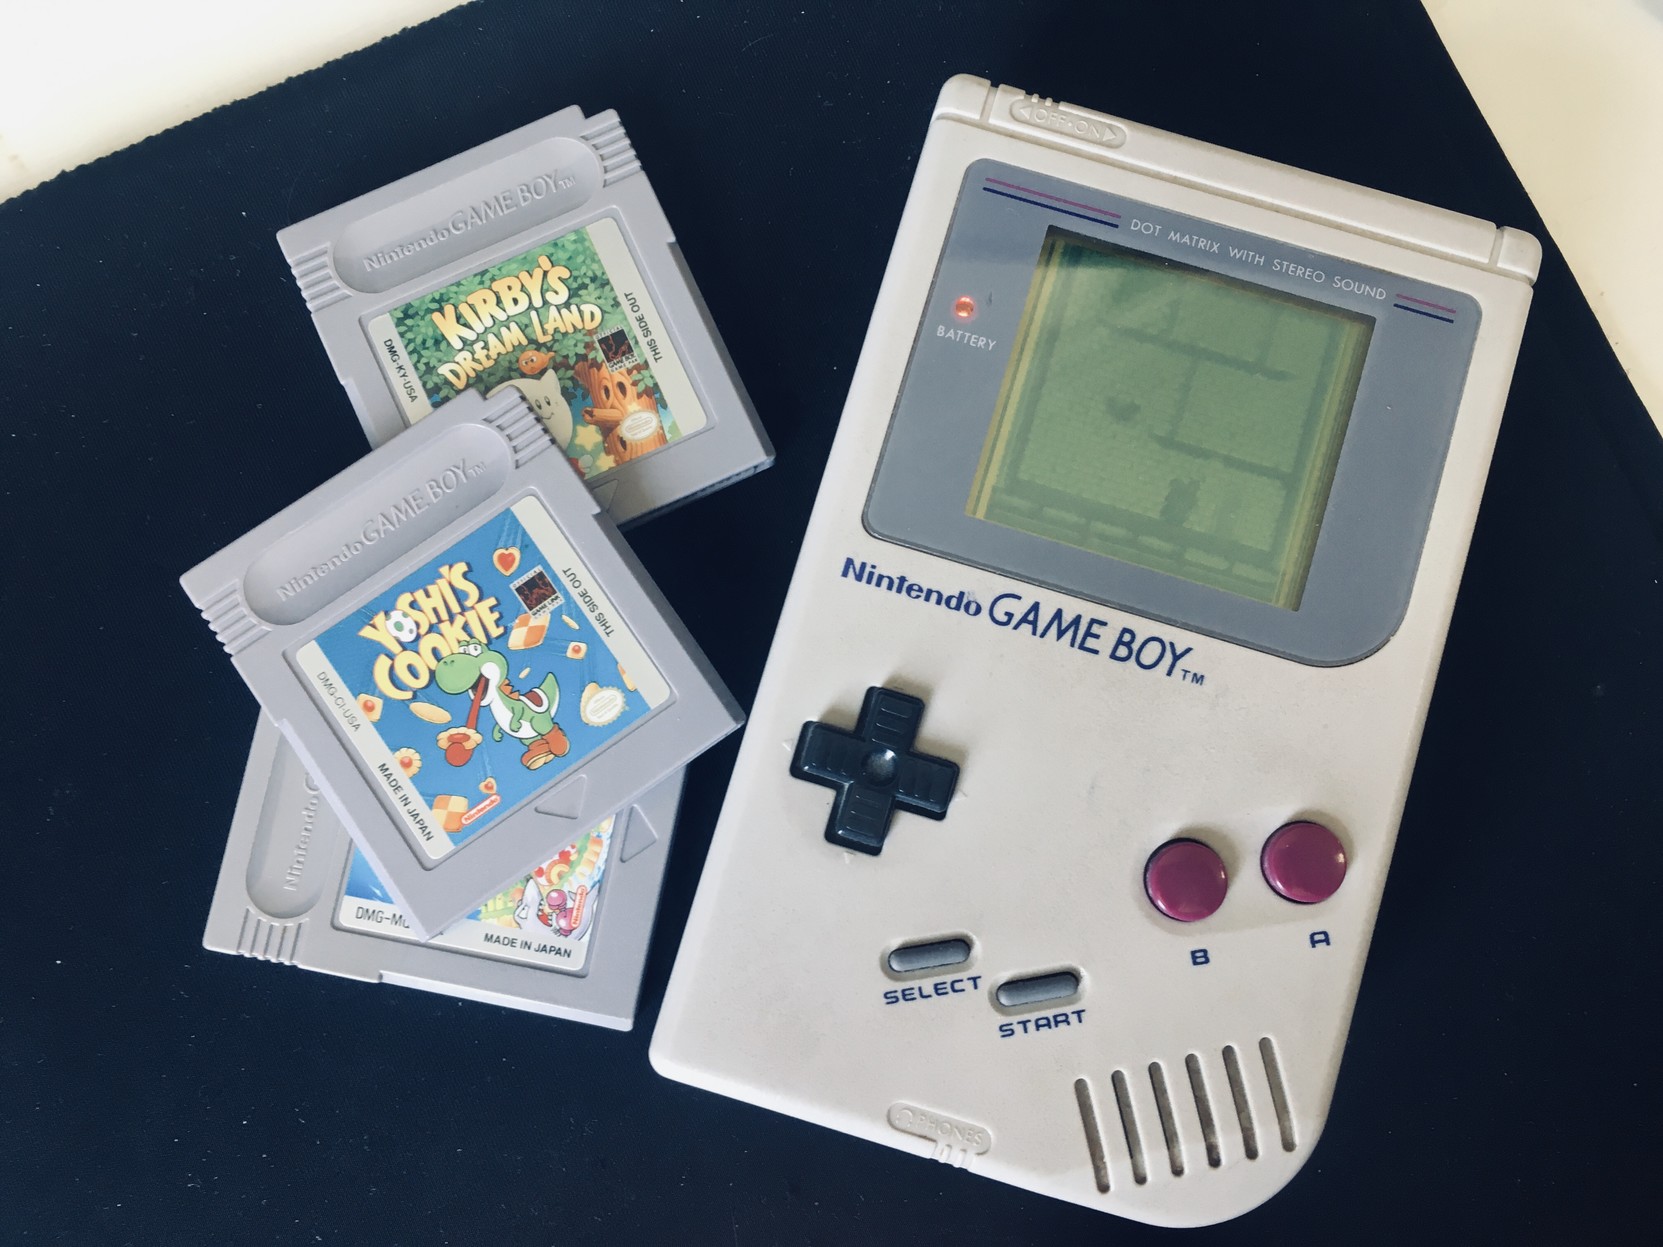 A hand held Game Boy console with game cartridges